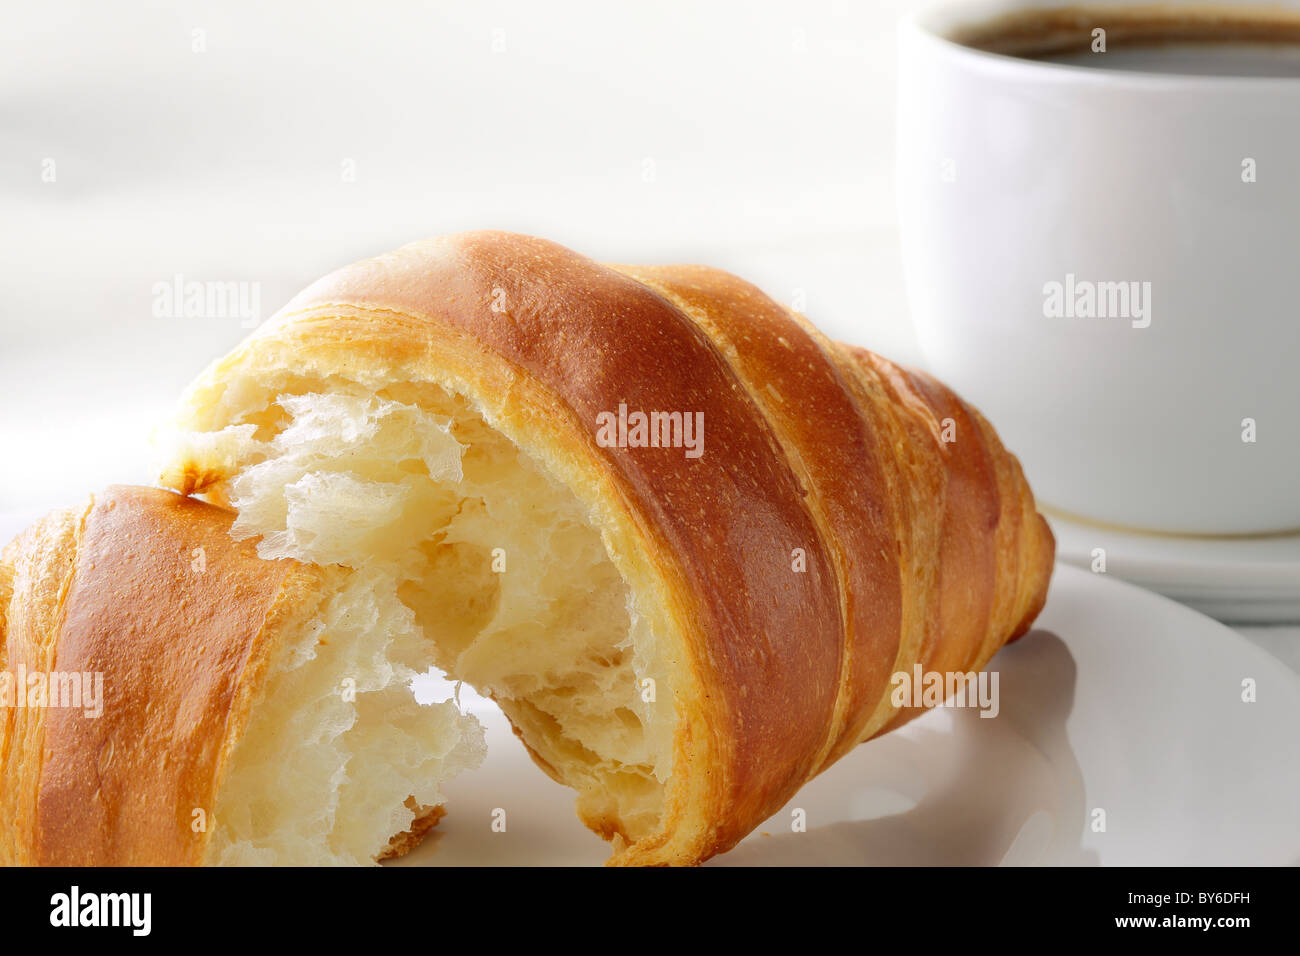 Croissant and coffee Stock Photo